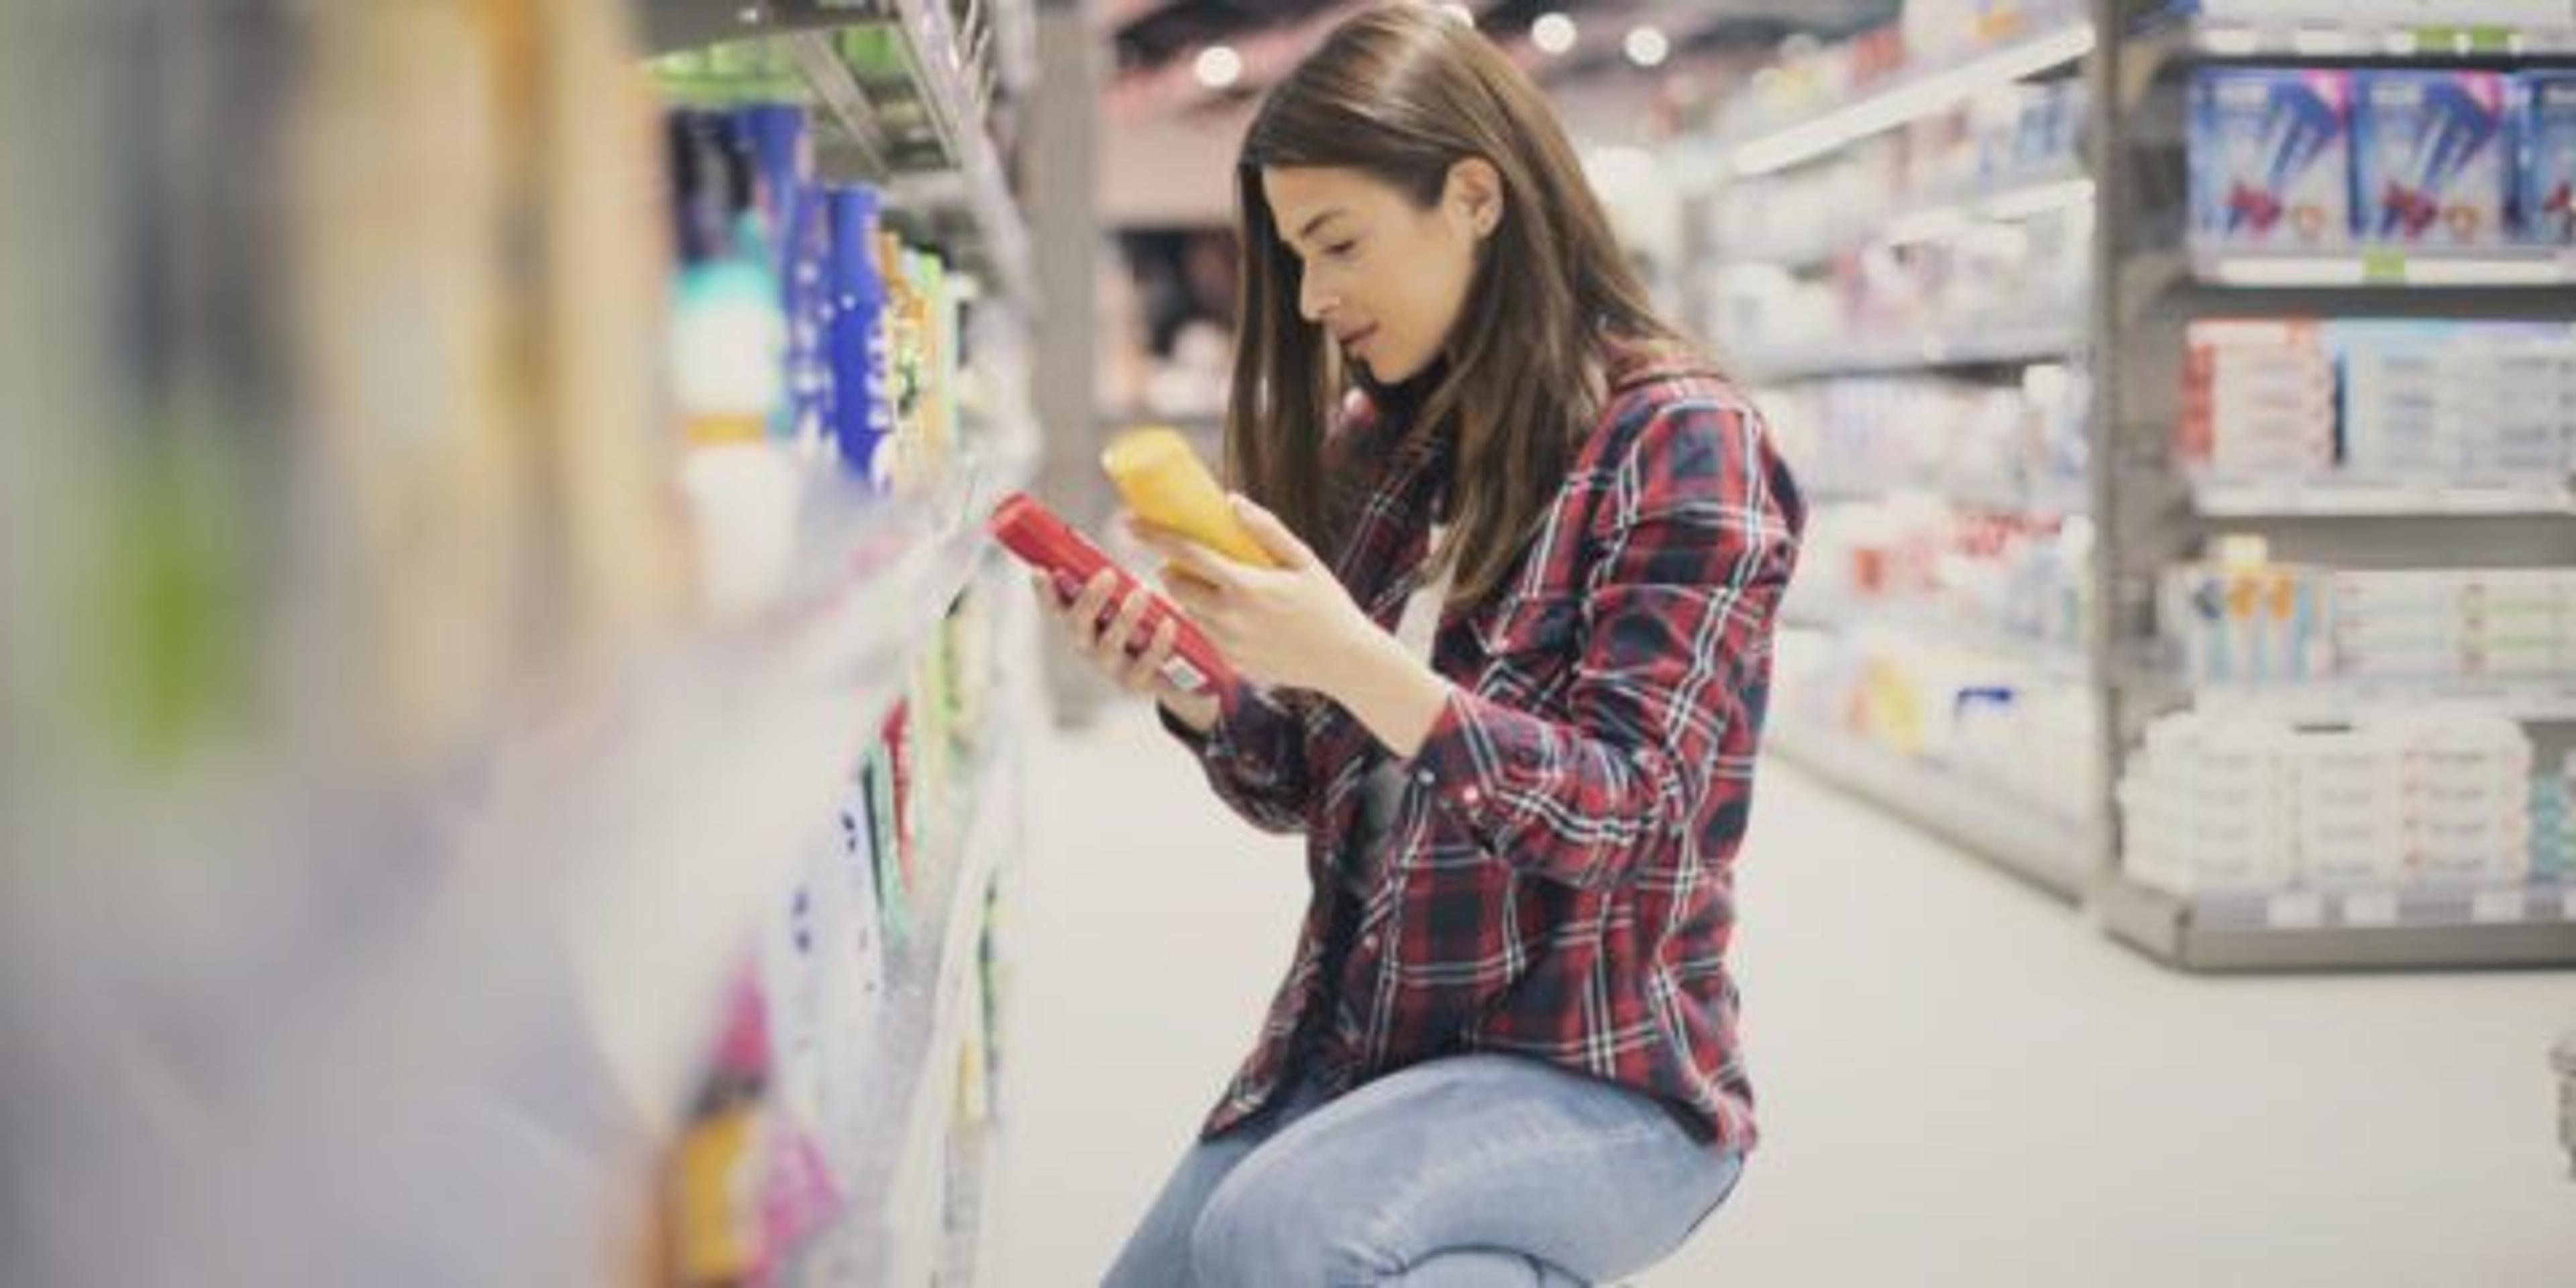 A woman examines sunscreen brands at the store.